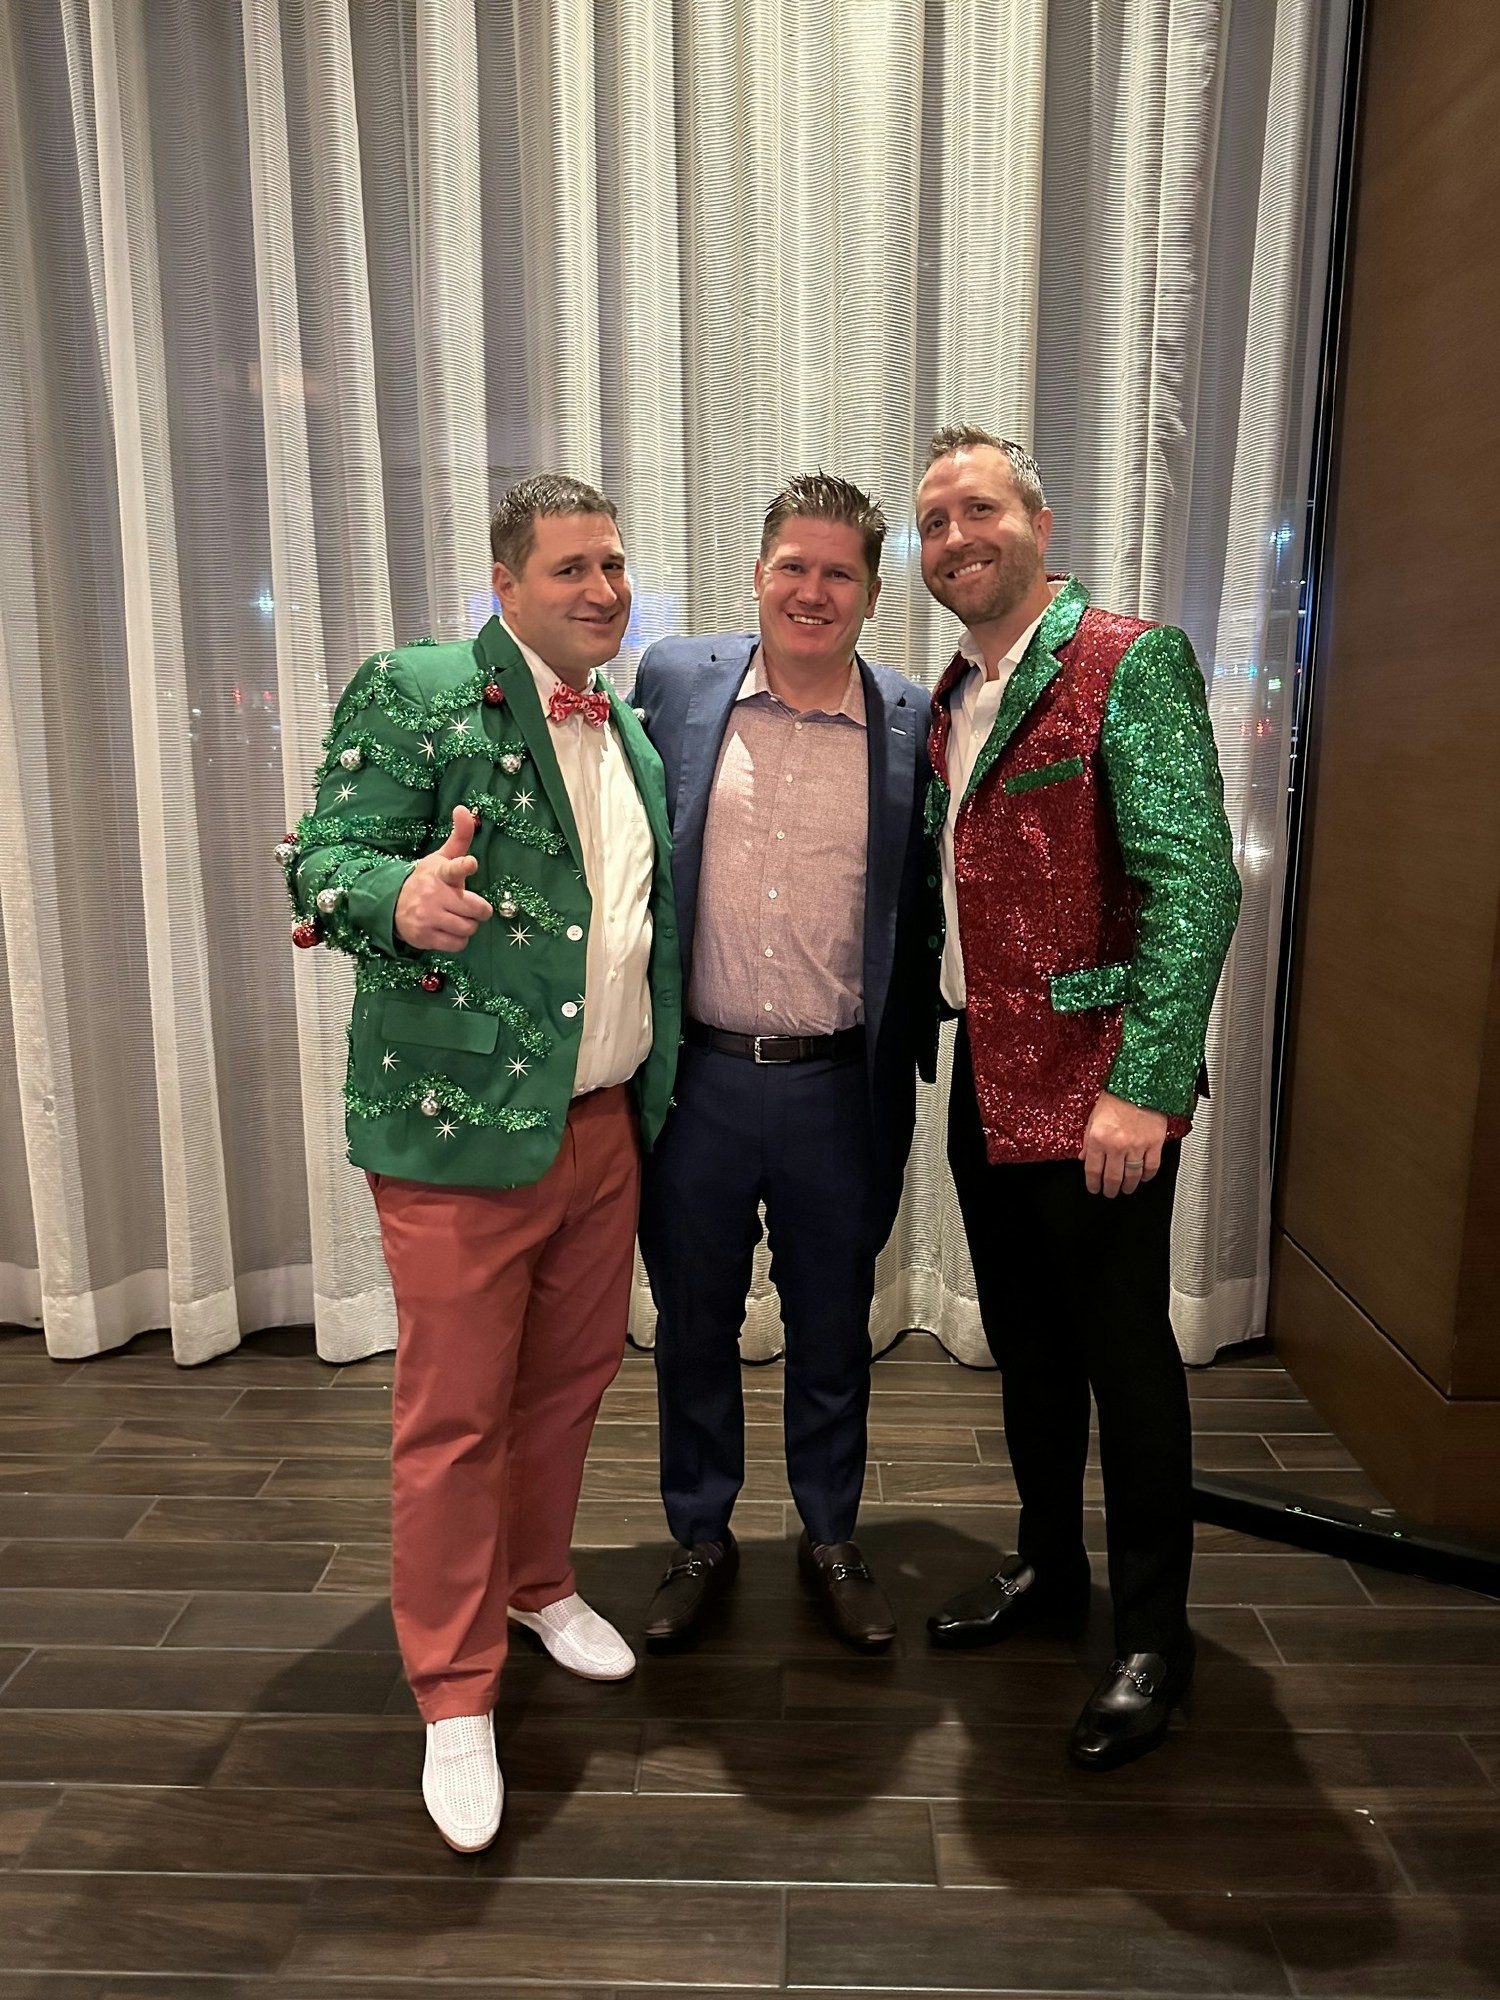 The 3 bosses, David Drab, Pat Boyle, and Mike Kimball dressed up for the company holiday party!